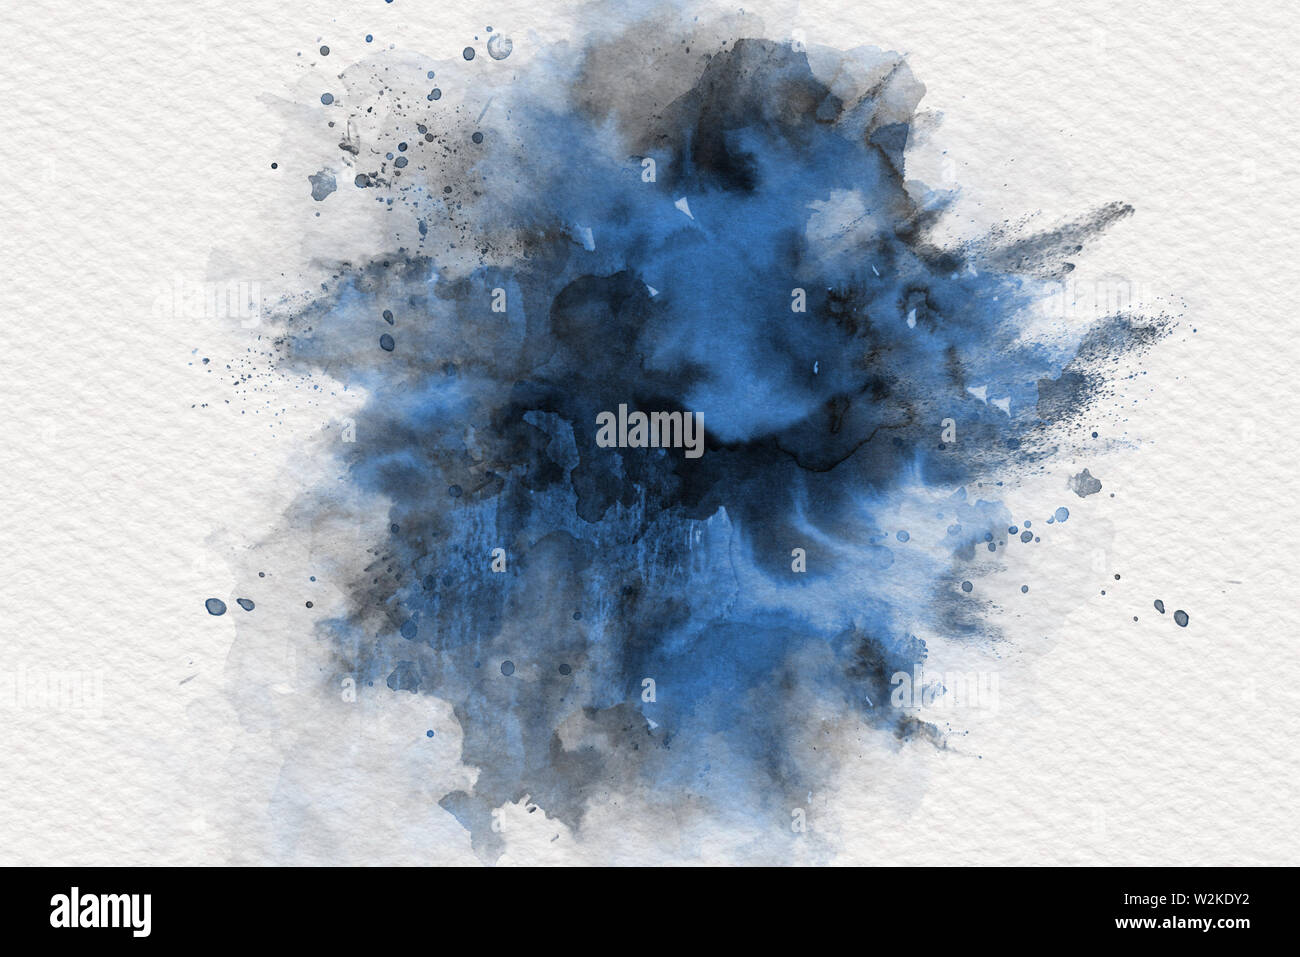 Download Abstract Watercolor Paint Splatter Background On Textured White Paper In A Central Blend Of Shades Of Blue And Black Stock Photo Alamy